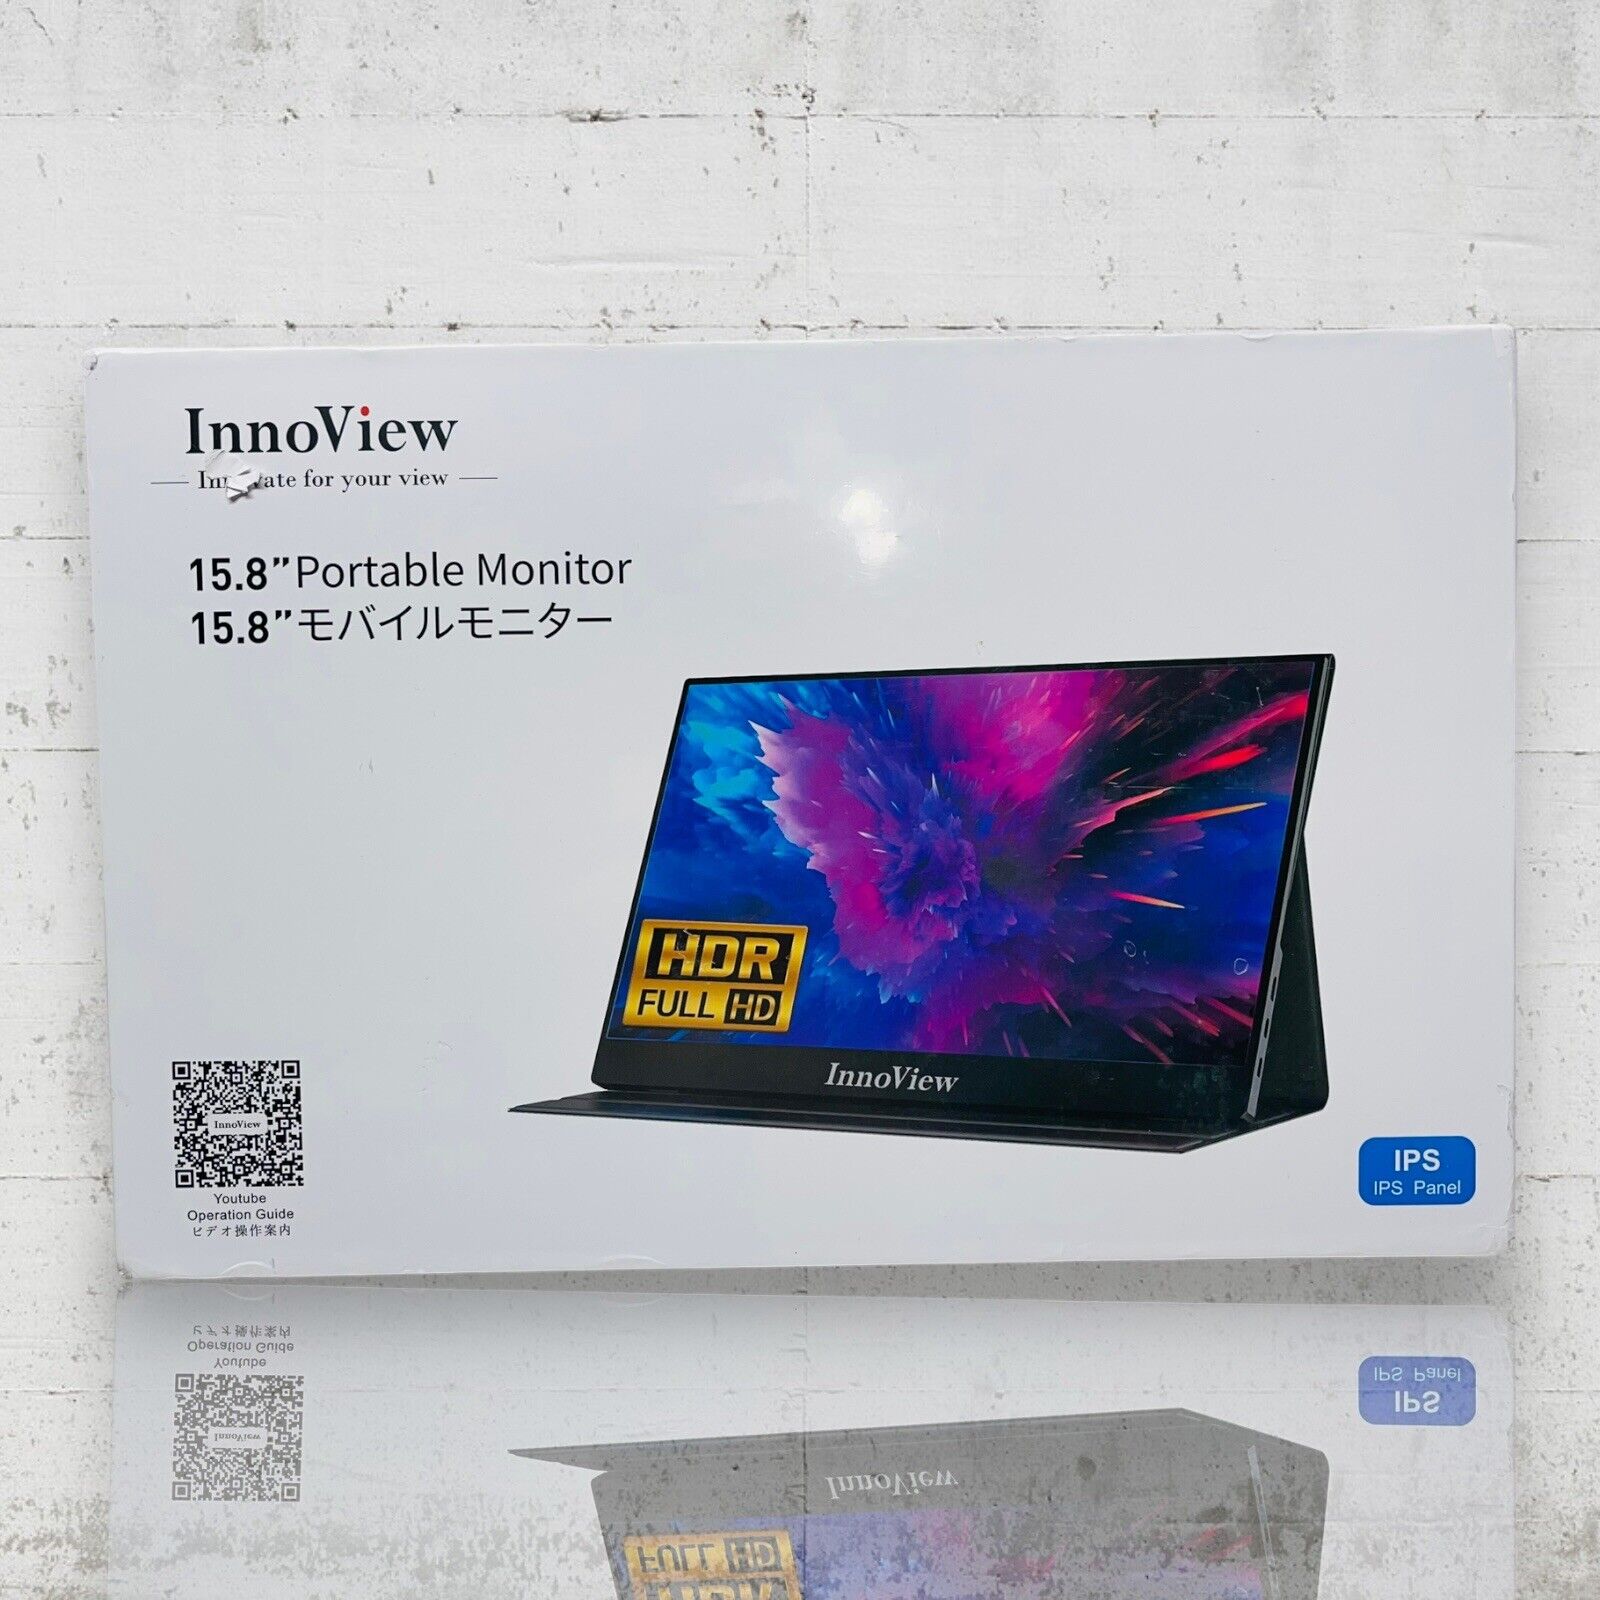 InnoView Portable Monitor 15.8 Inch FHD 1080P HDMI External Monitor INVPM406